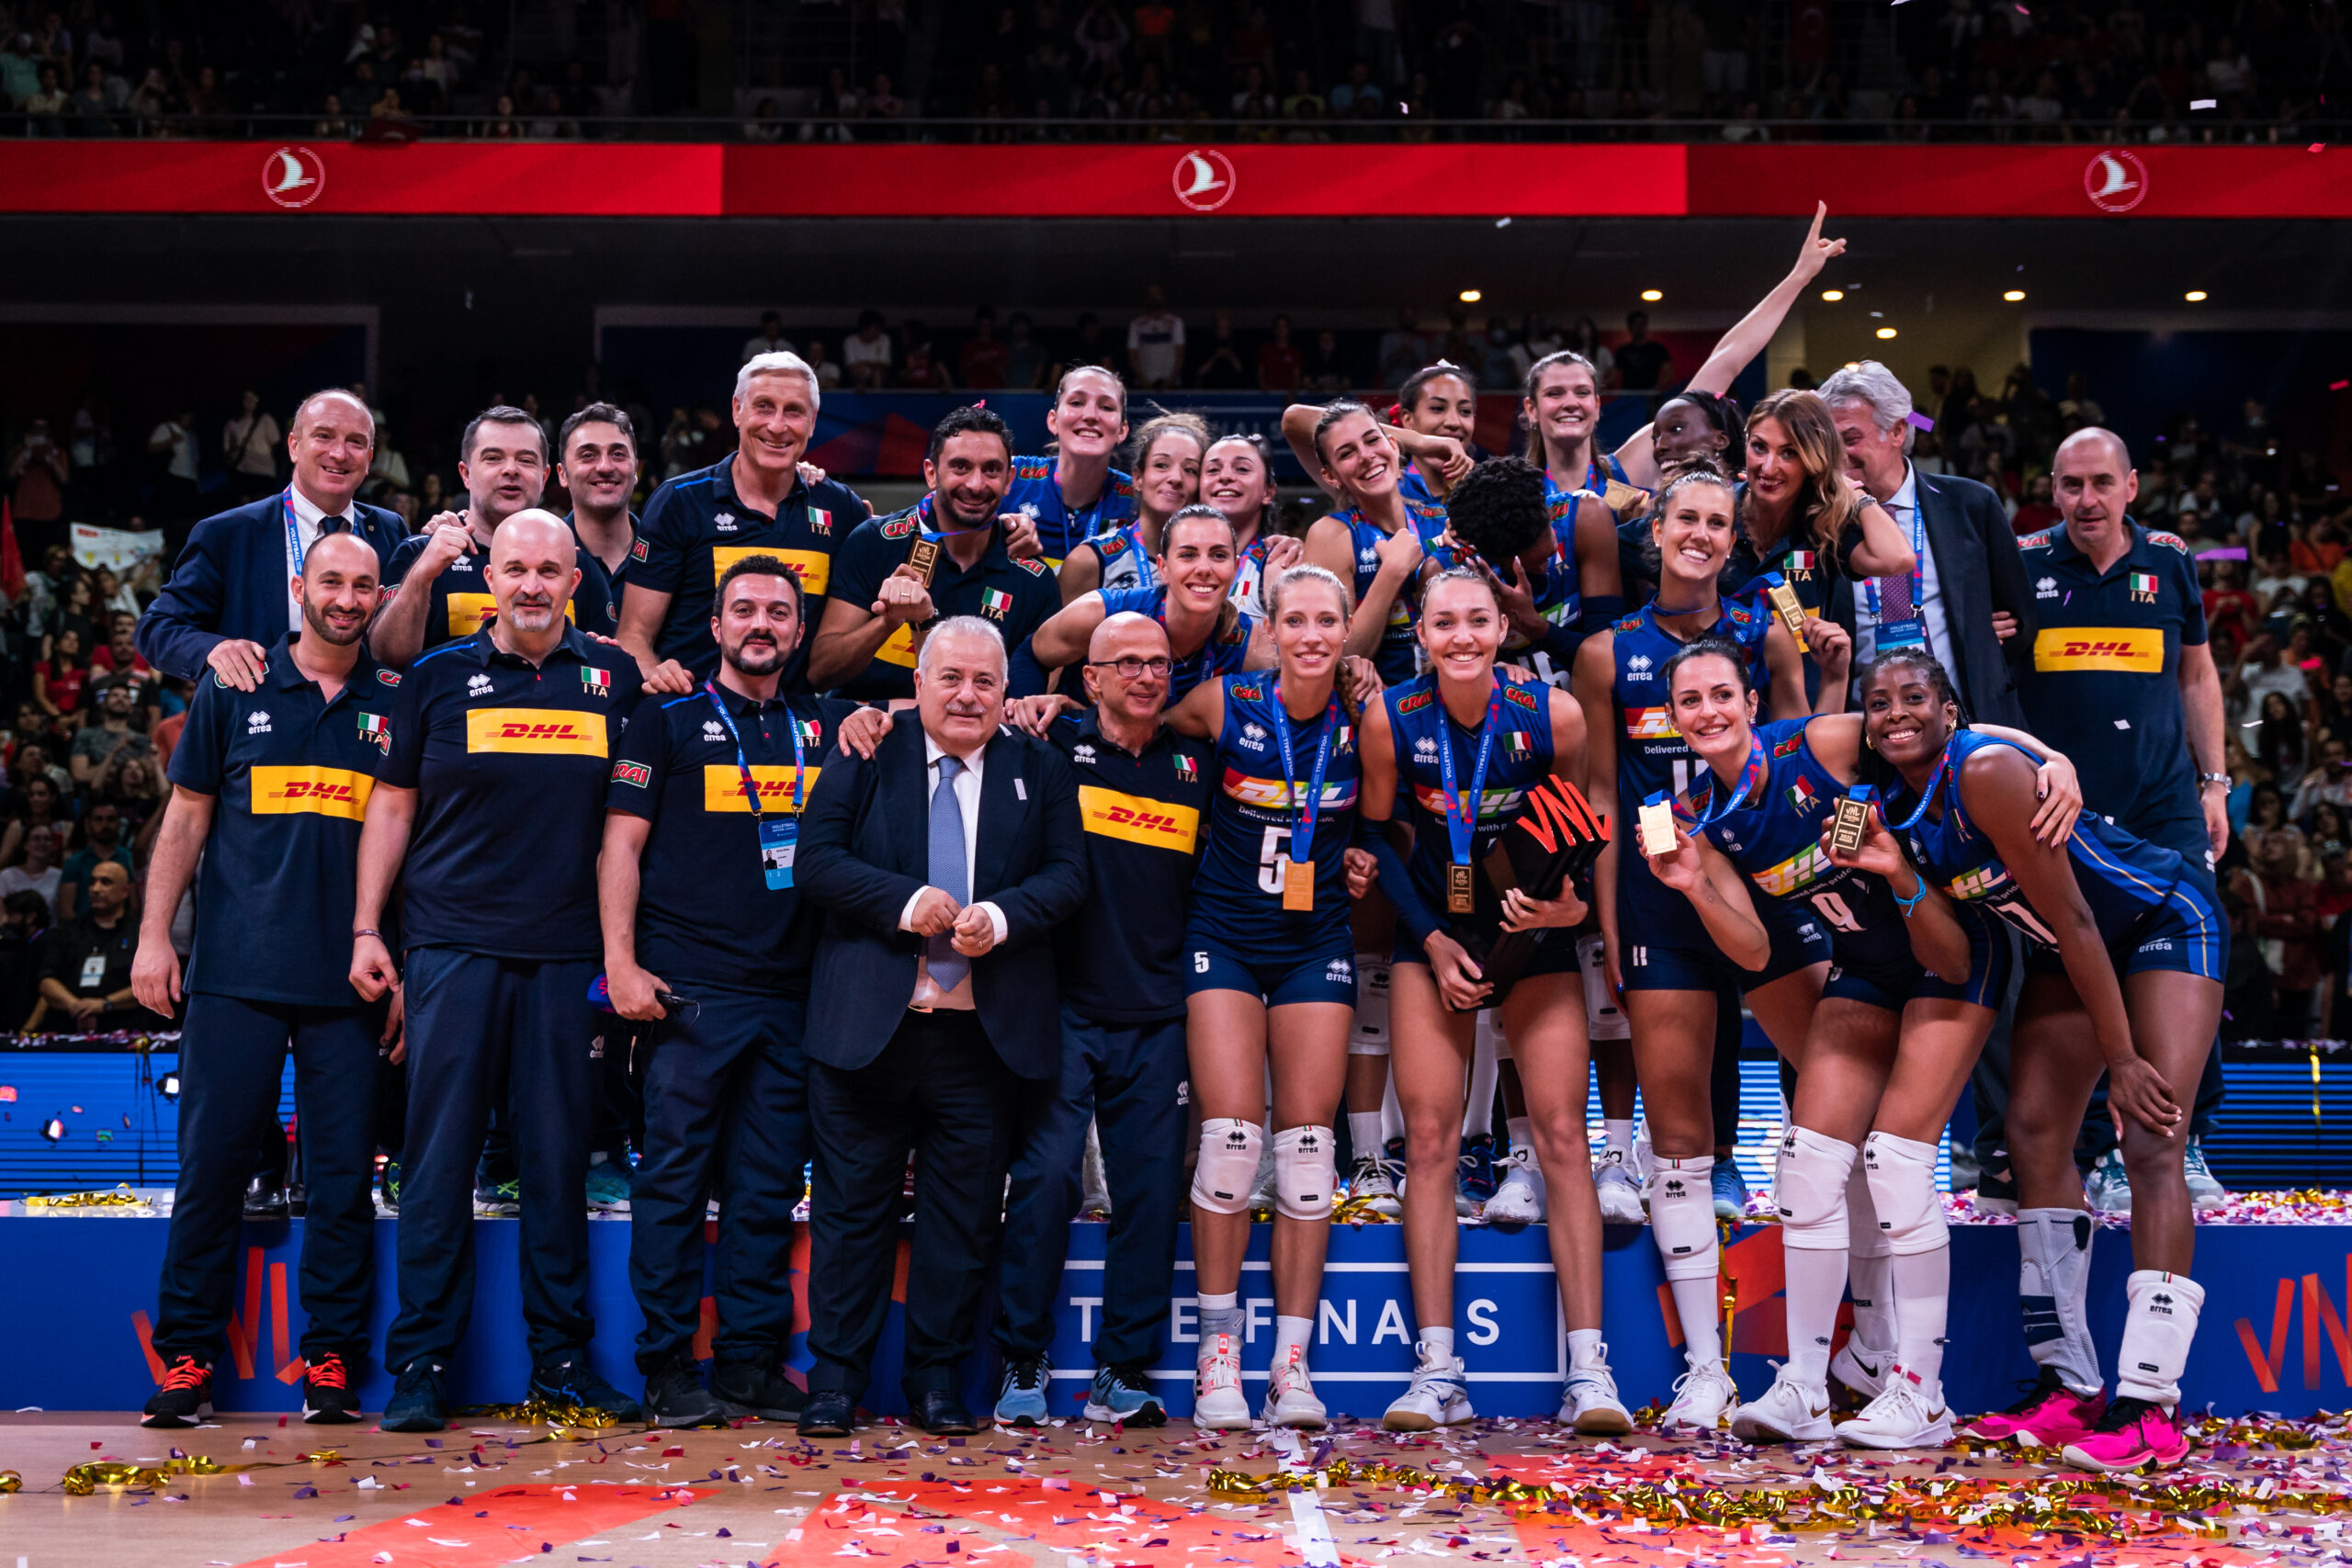 Italy sweep Brazil to win first VNL title